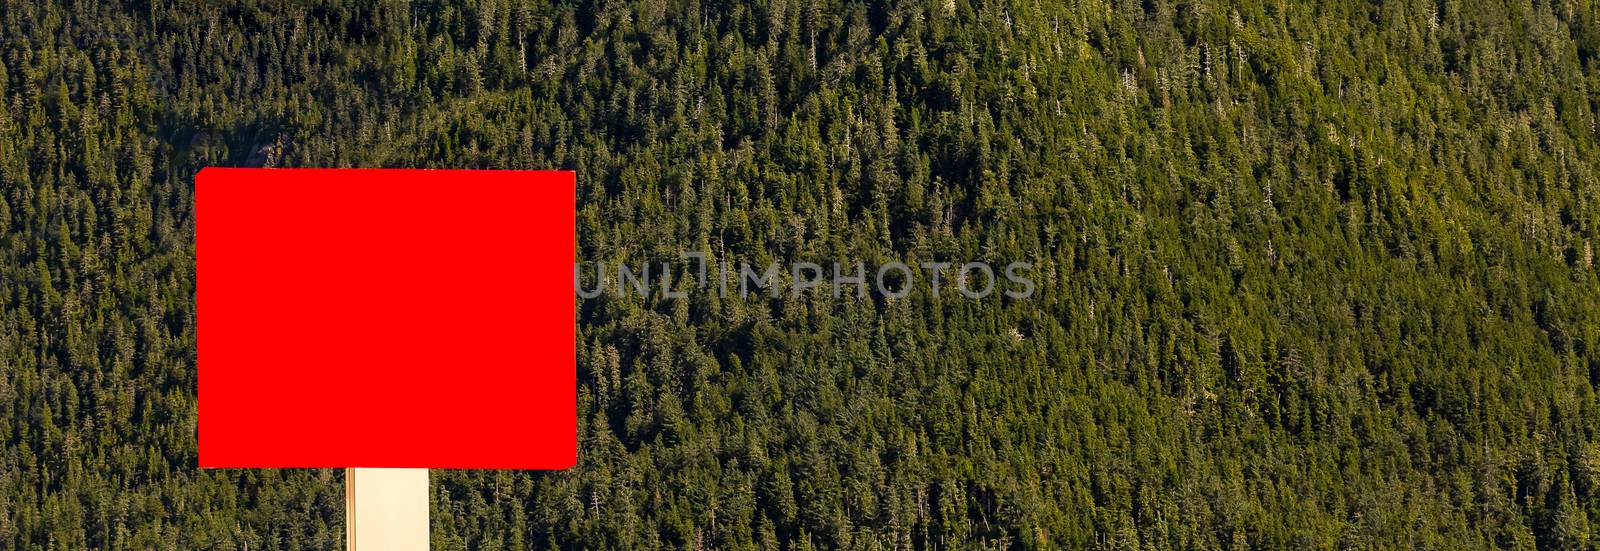 Blank red sign in front of a green forest by DamantisZ